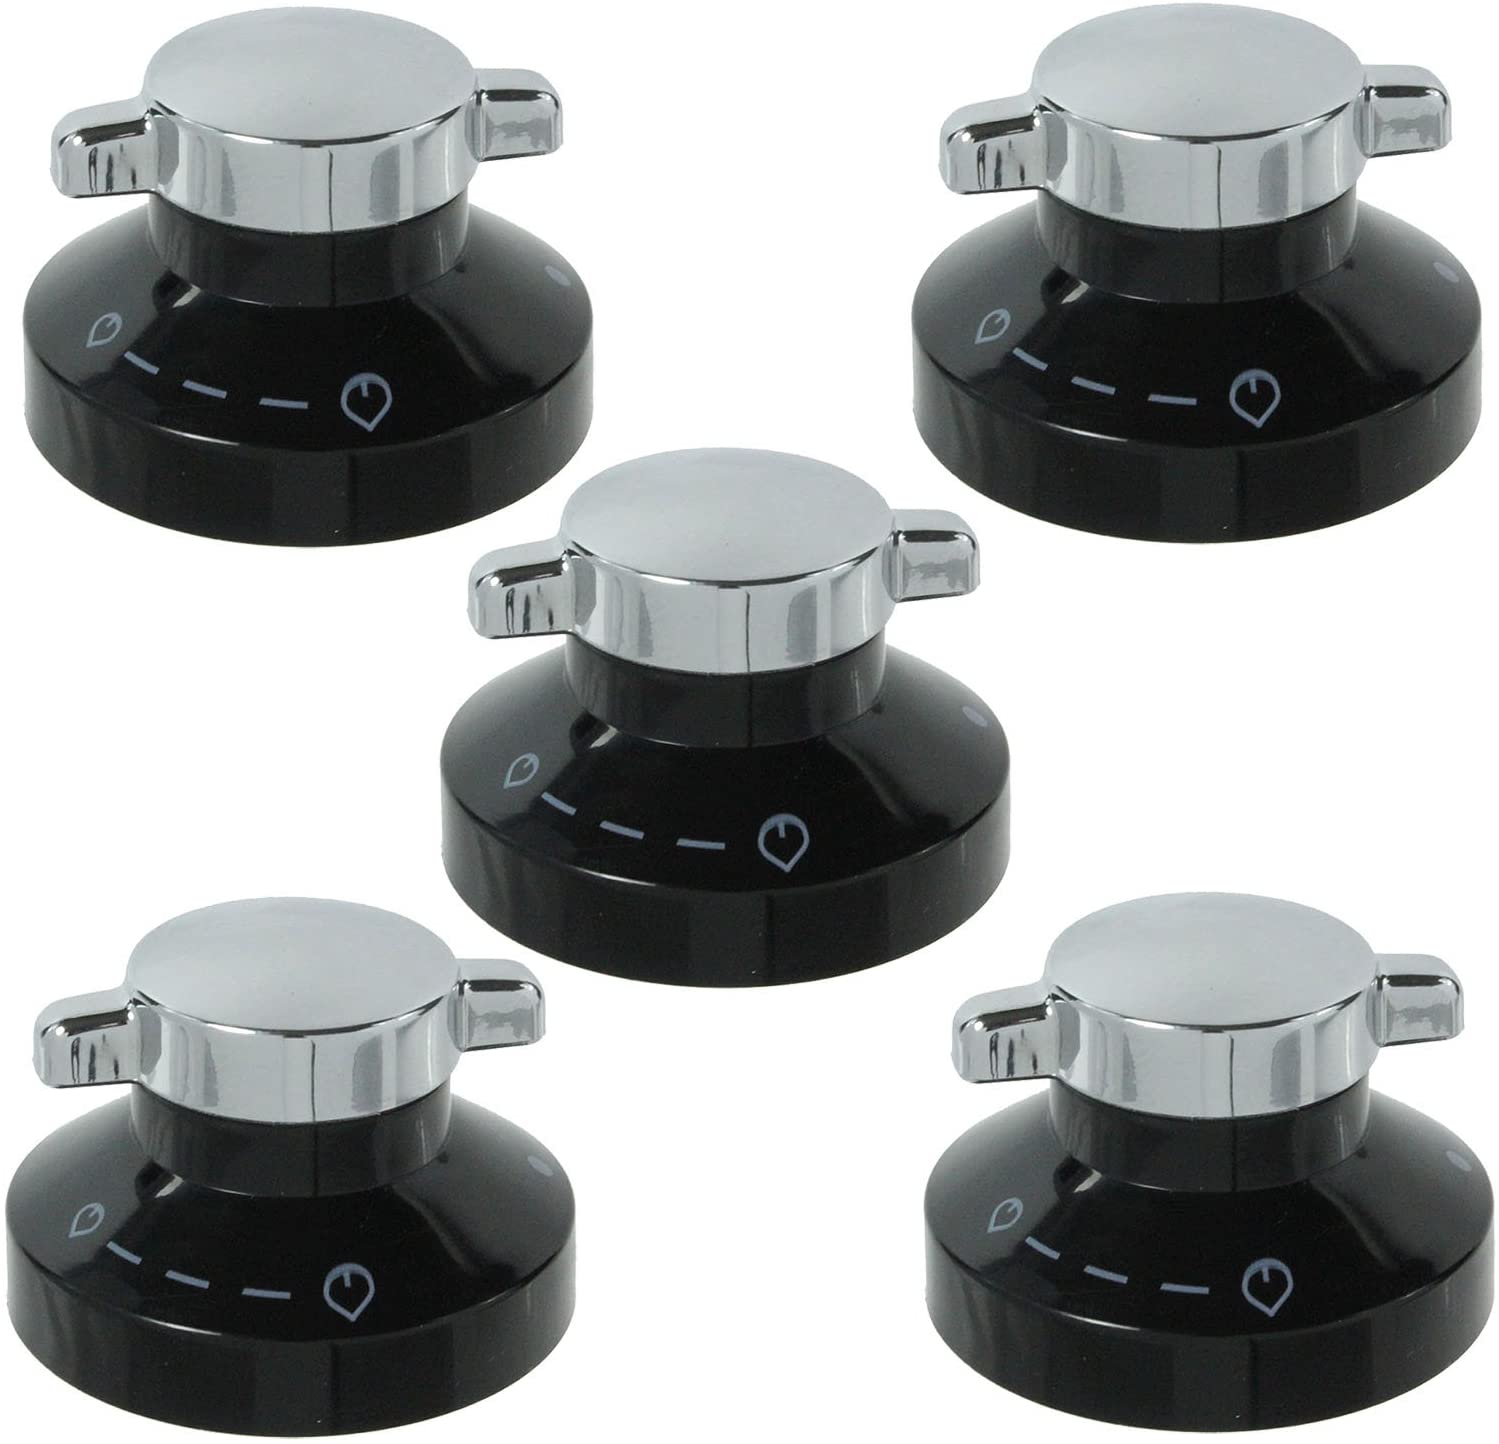 Belling New World Stoves Control Knob Dial for Cooker Hob (Black / Silver, Pack of 5 x Knobs) 081880326